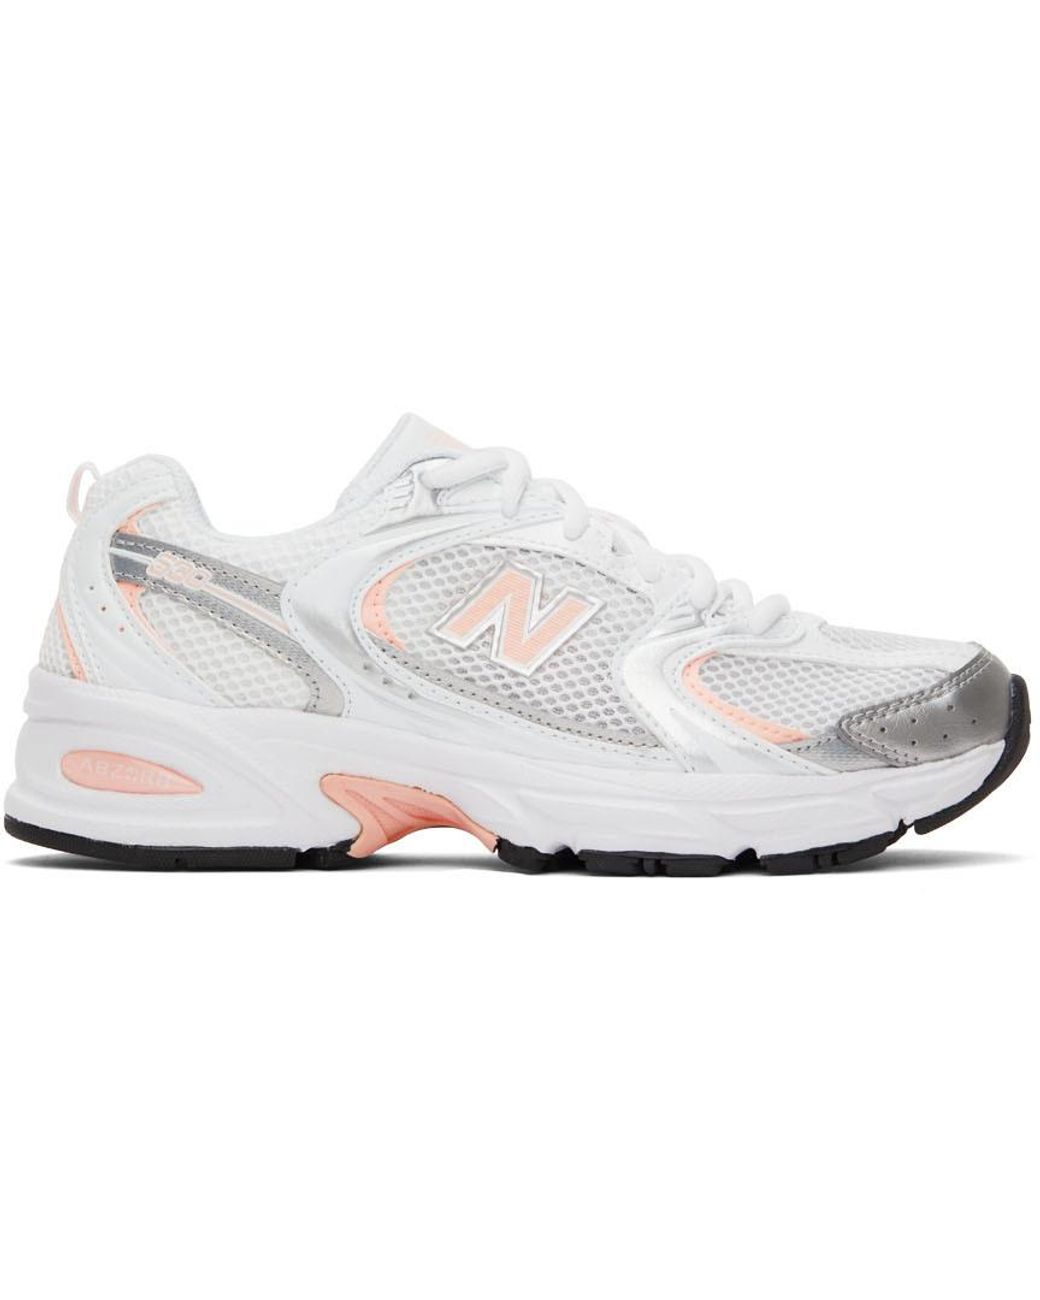 New Balance Pink 530 Sneakers in White/Cloud Pink (White) | Lyst